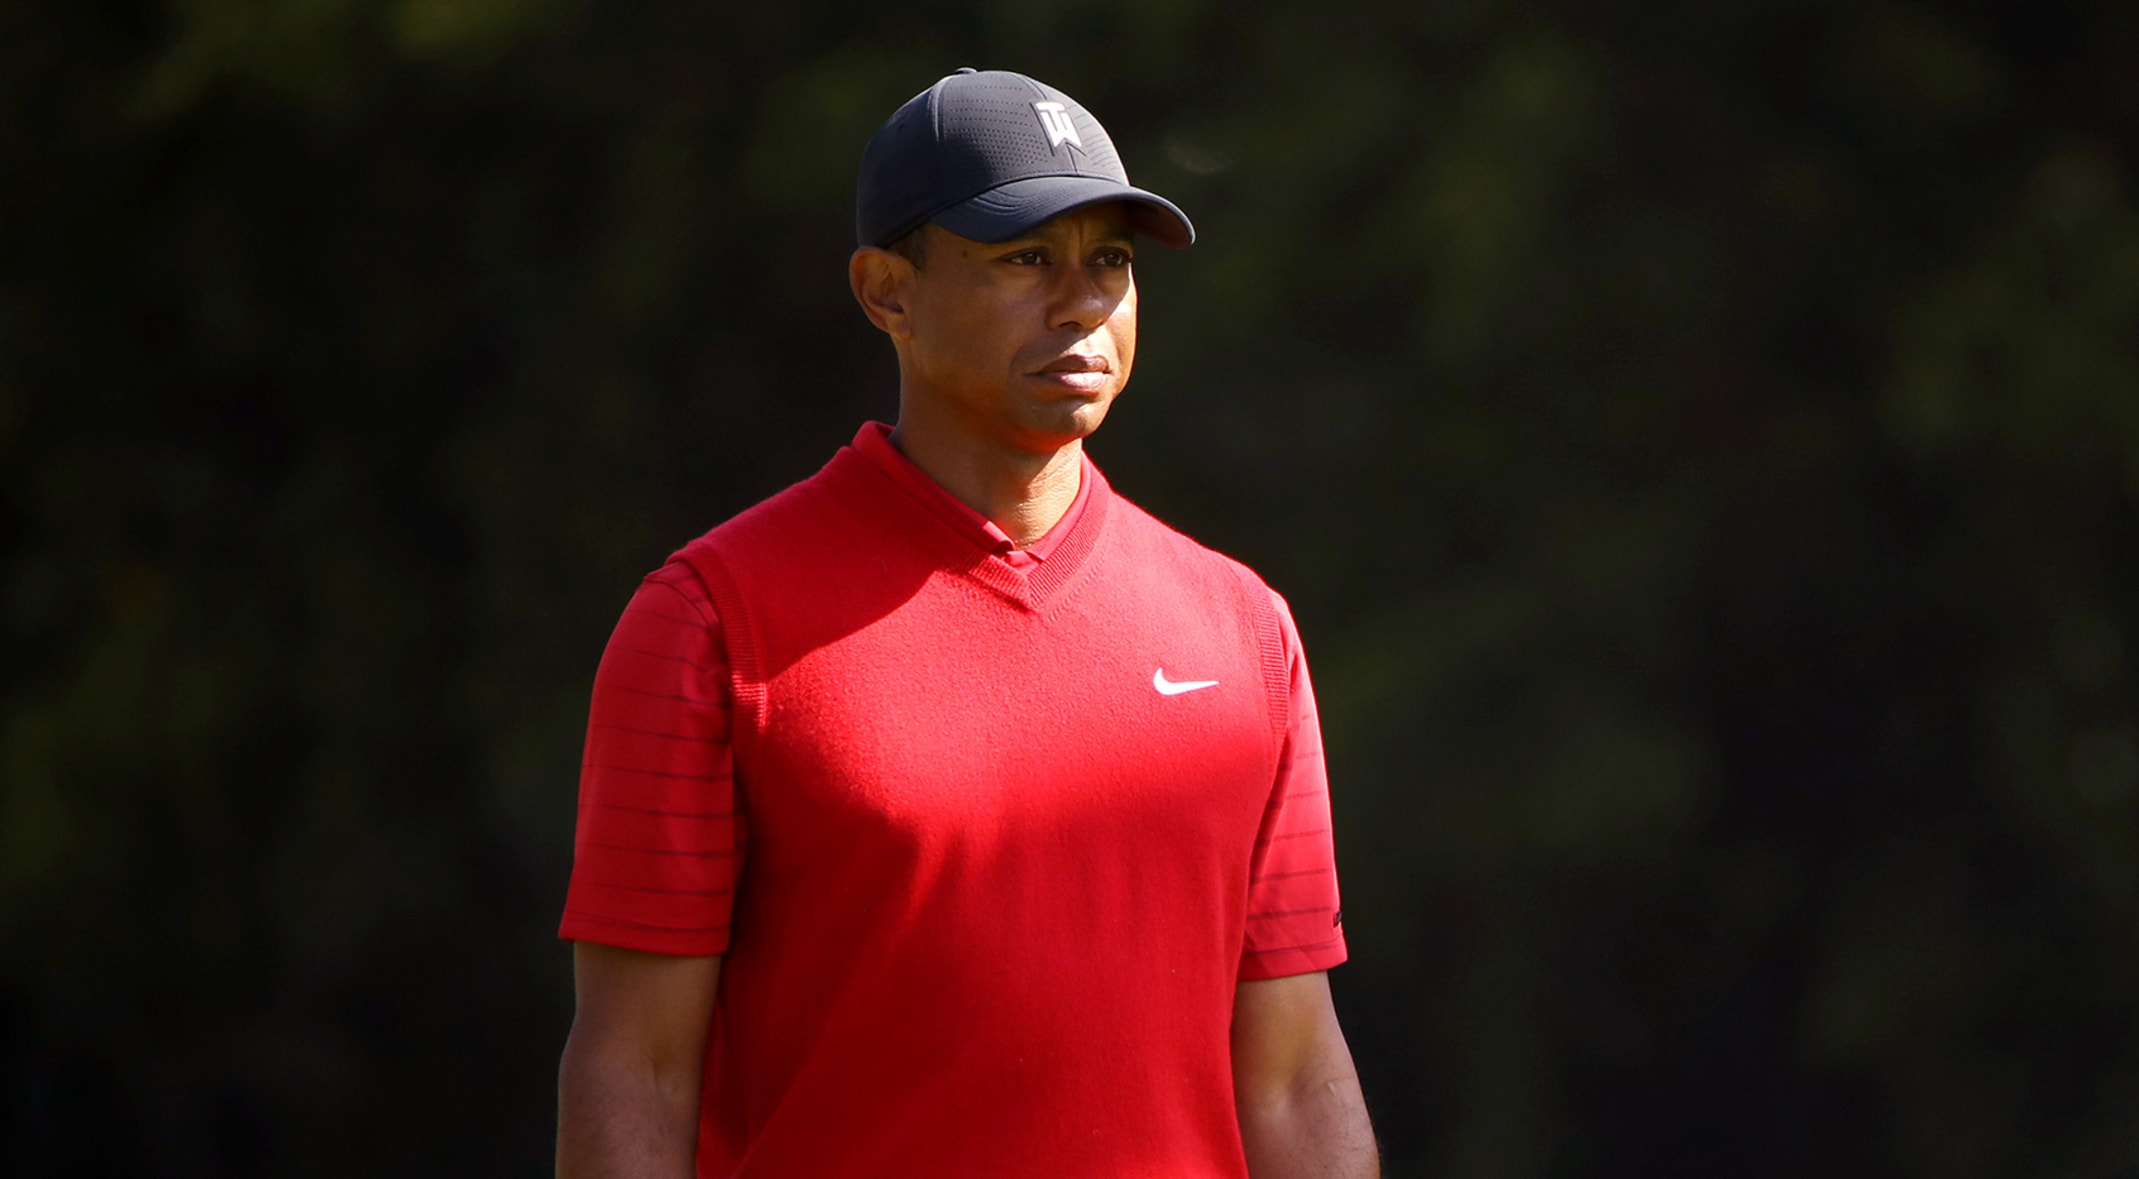 Tiger Woods To Miss Arnold Palmer Invitational Presented By Mastercard